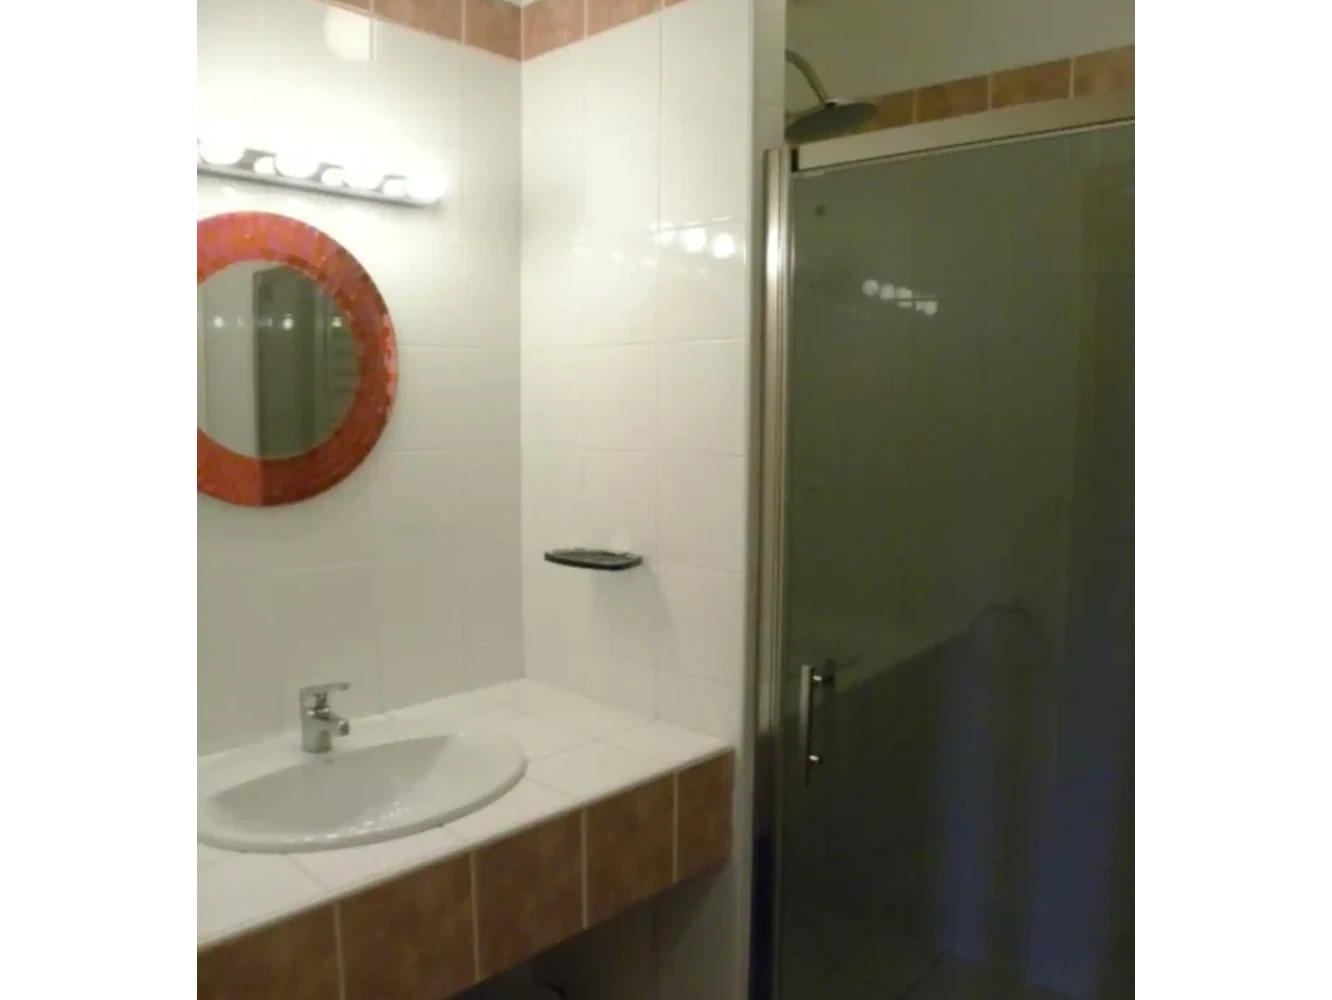 The shower room